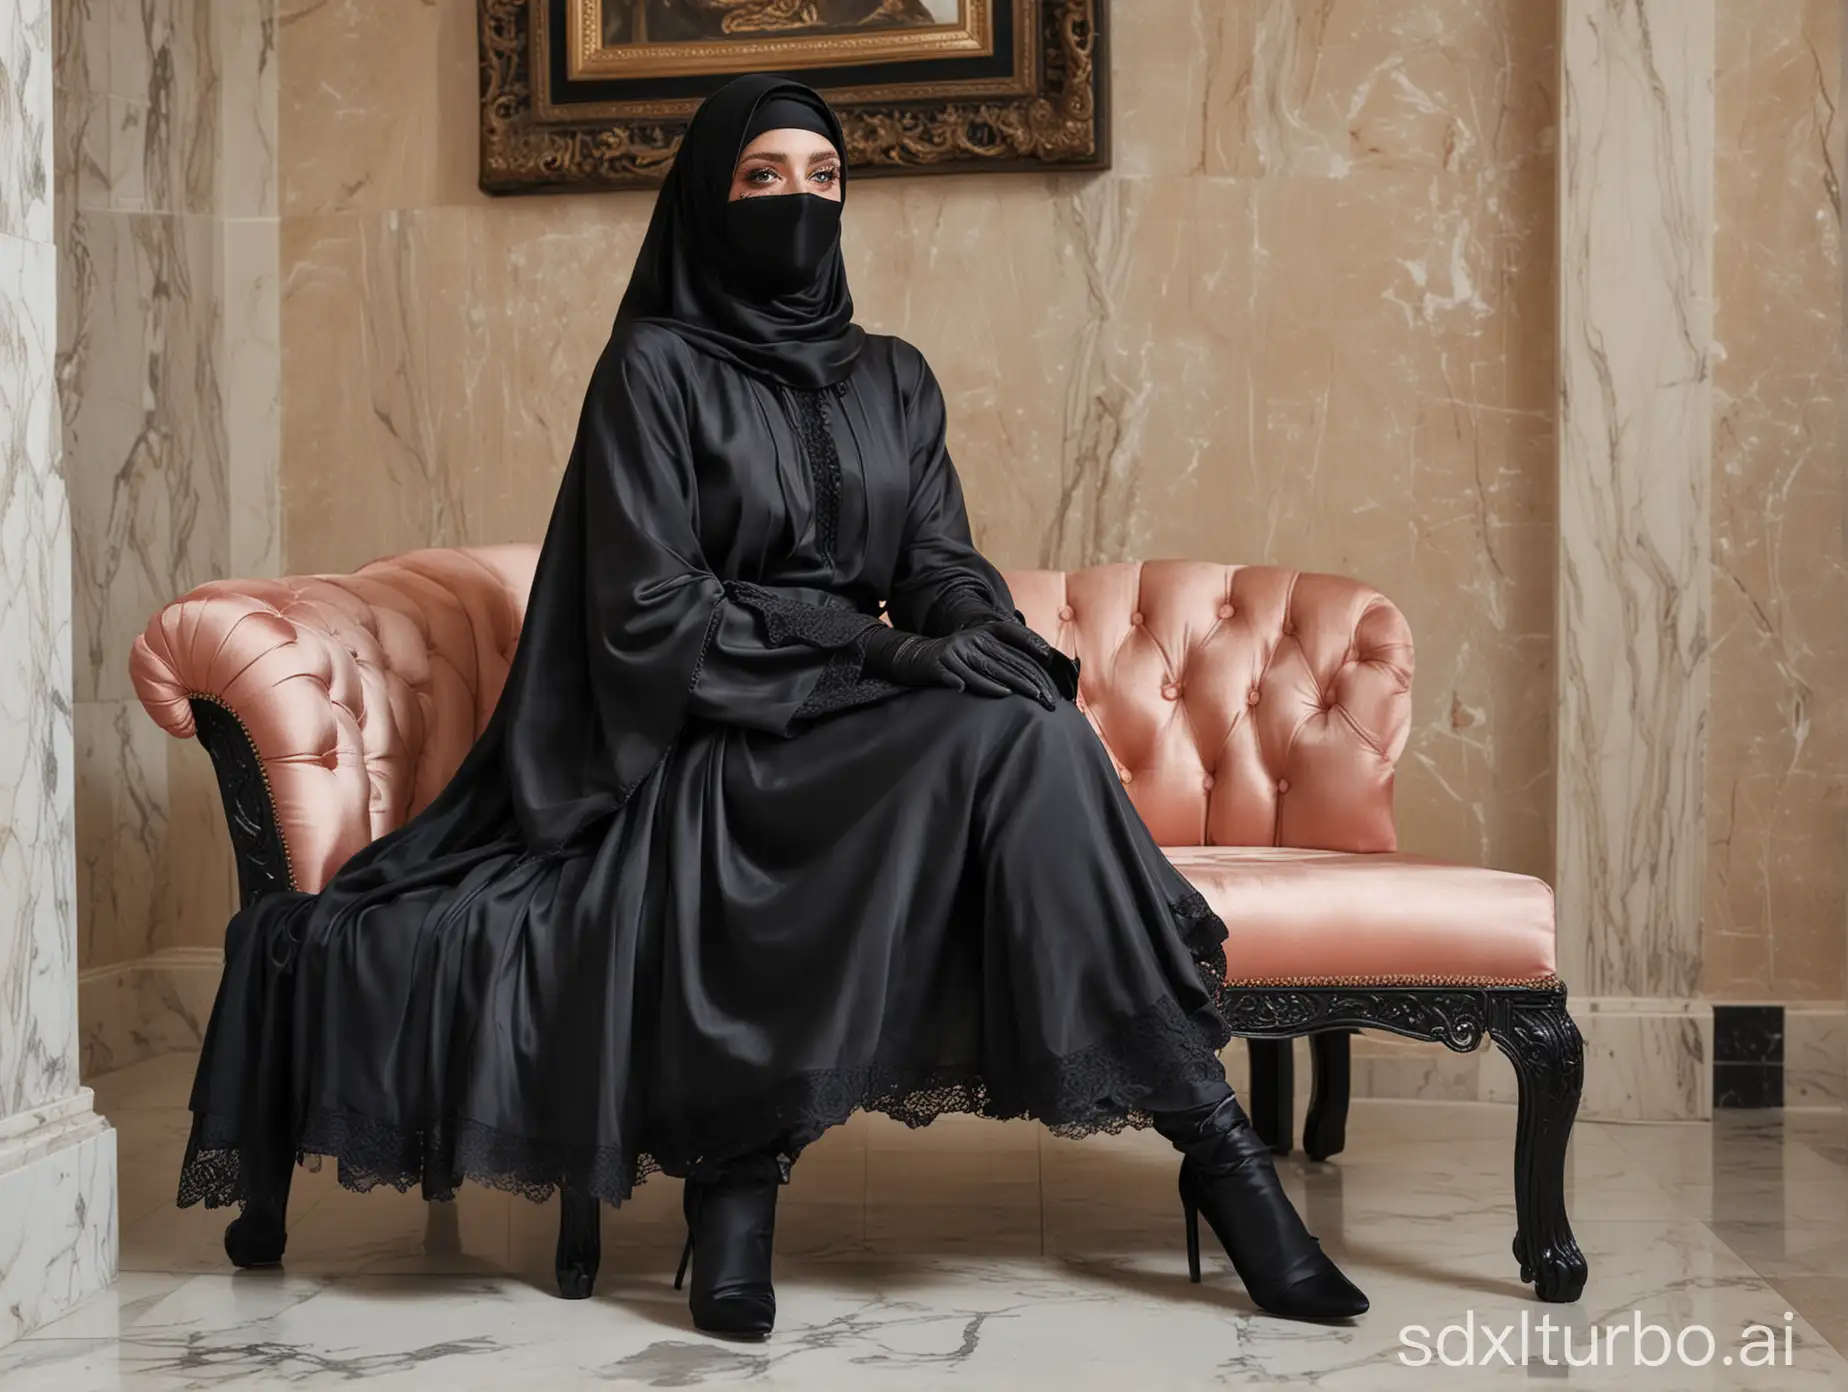 transgender BCBG man of 50 years, blue eyes made up, fully abaya satin black, , black hijab and full niqab black masked mouth, transparent veil lace on head, feet bare. Black transparent gloves. sitting with crossed legs on bench in luxury waiting room, marble wall draped red.